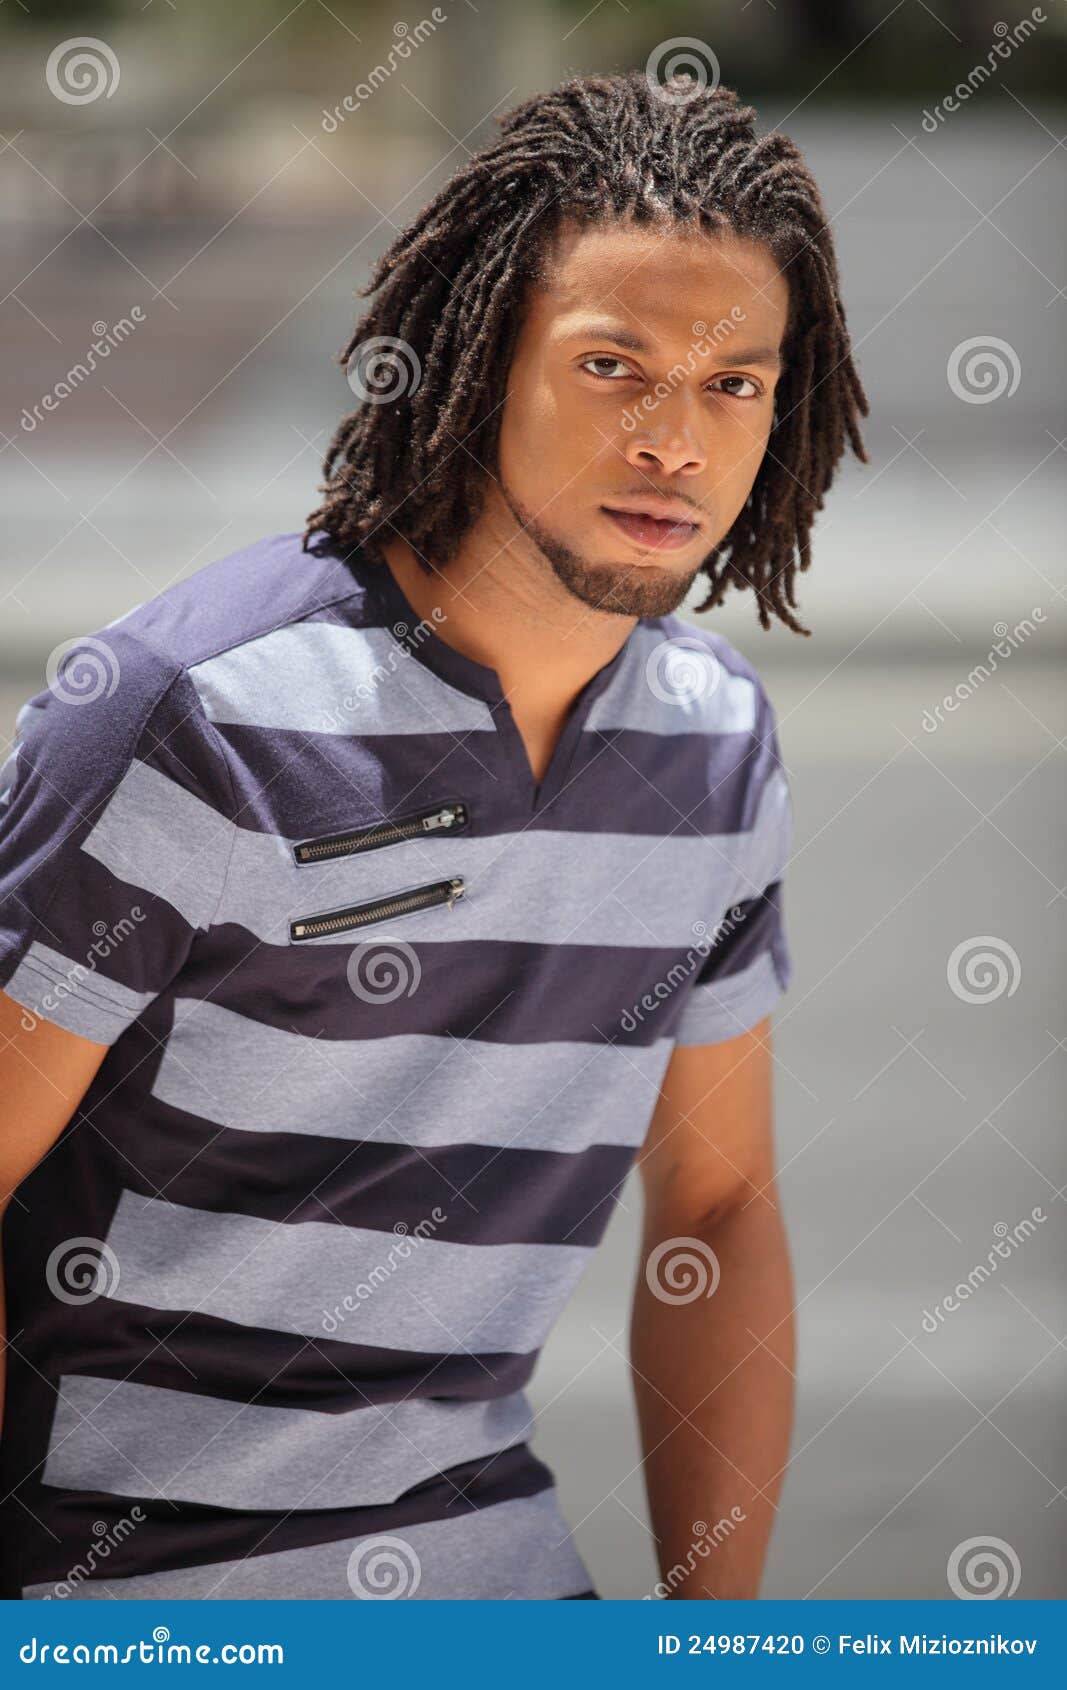 Man With Dreads Stock Photo Image Of Black Style